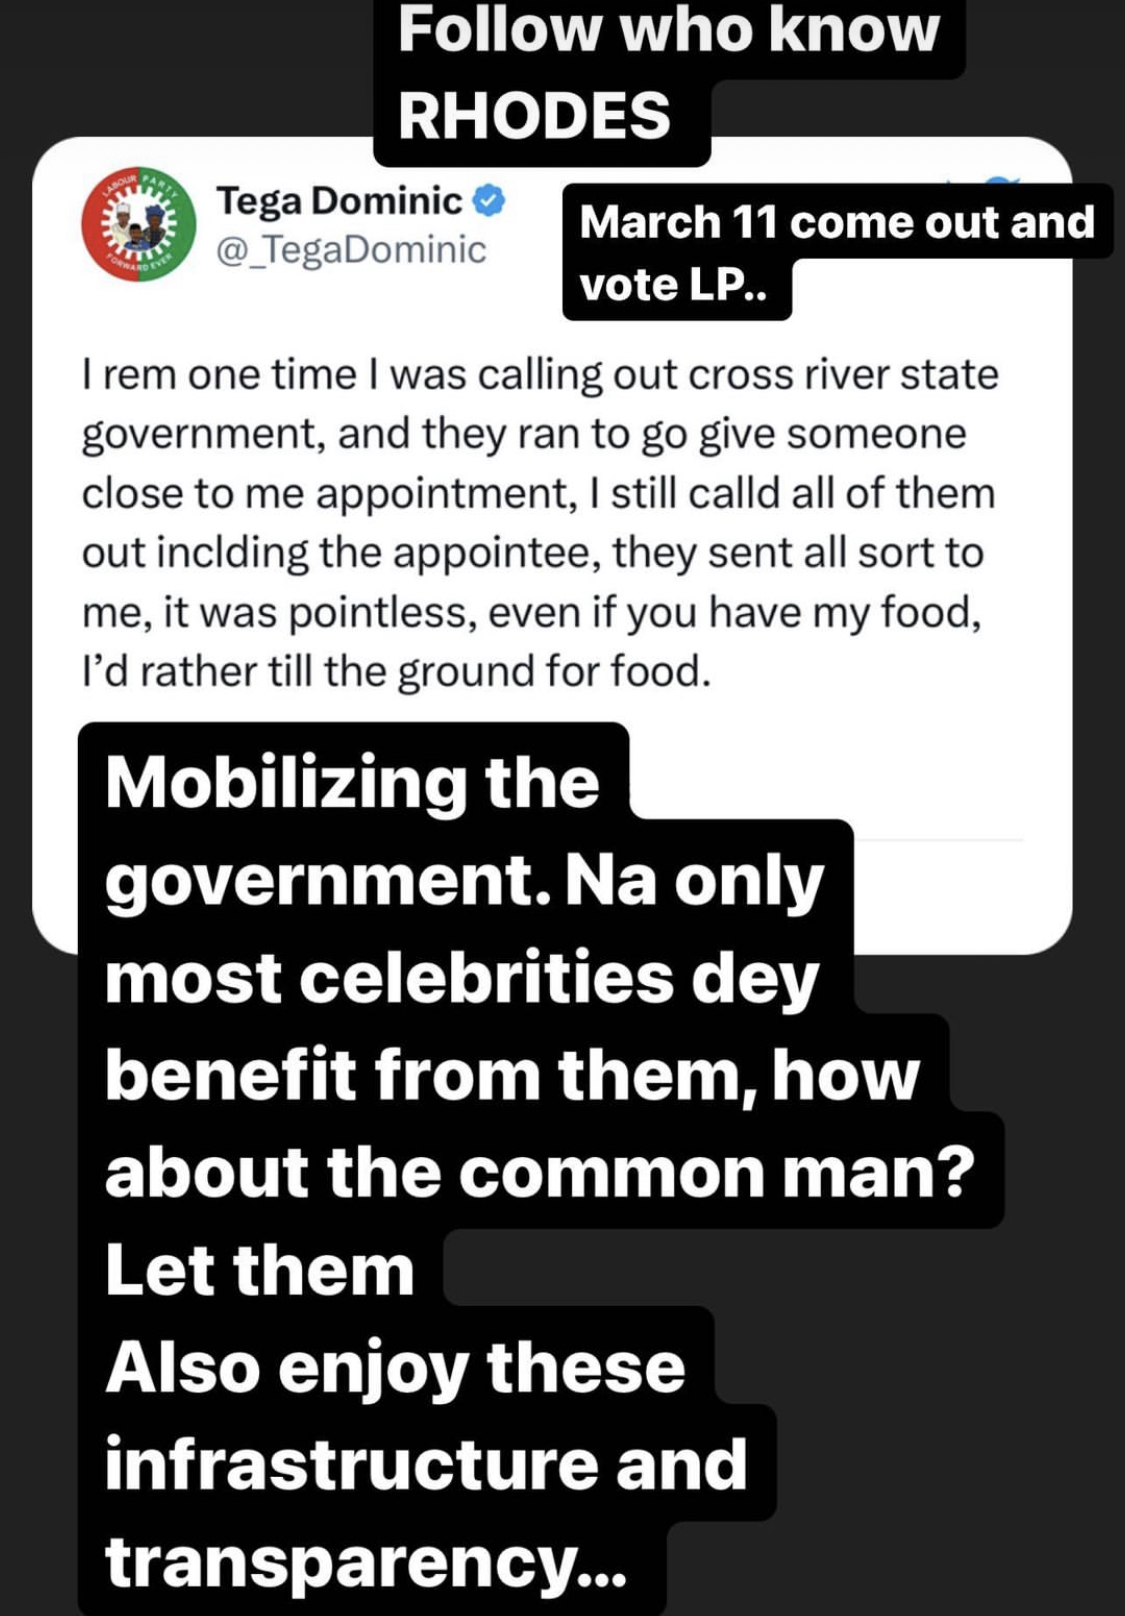 Celebrities were chasing clout during Endsars, now with Govt. - BBNaija Tega blasts colleagues